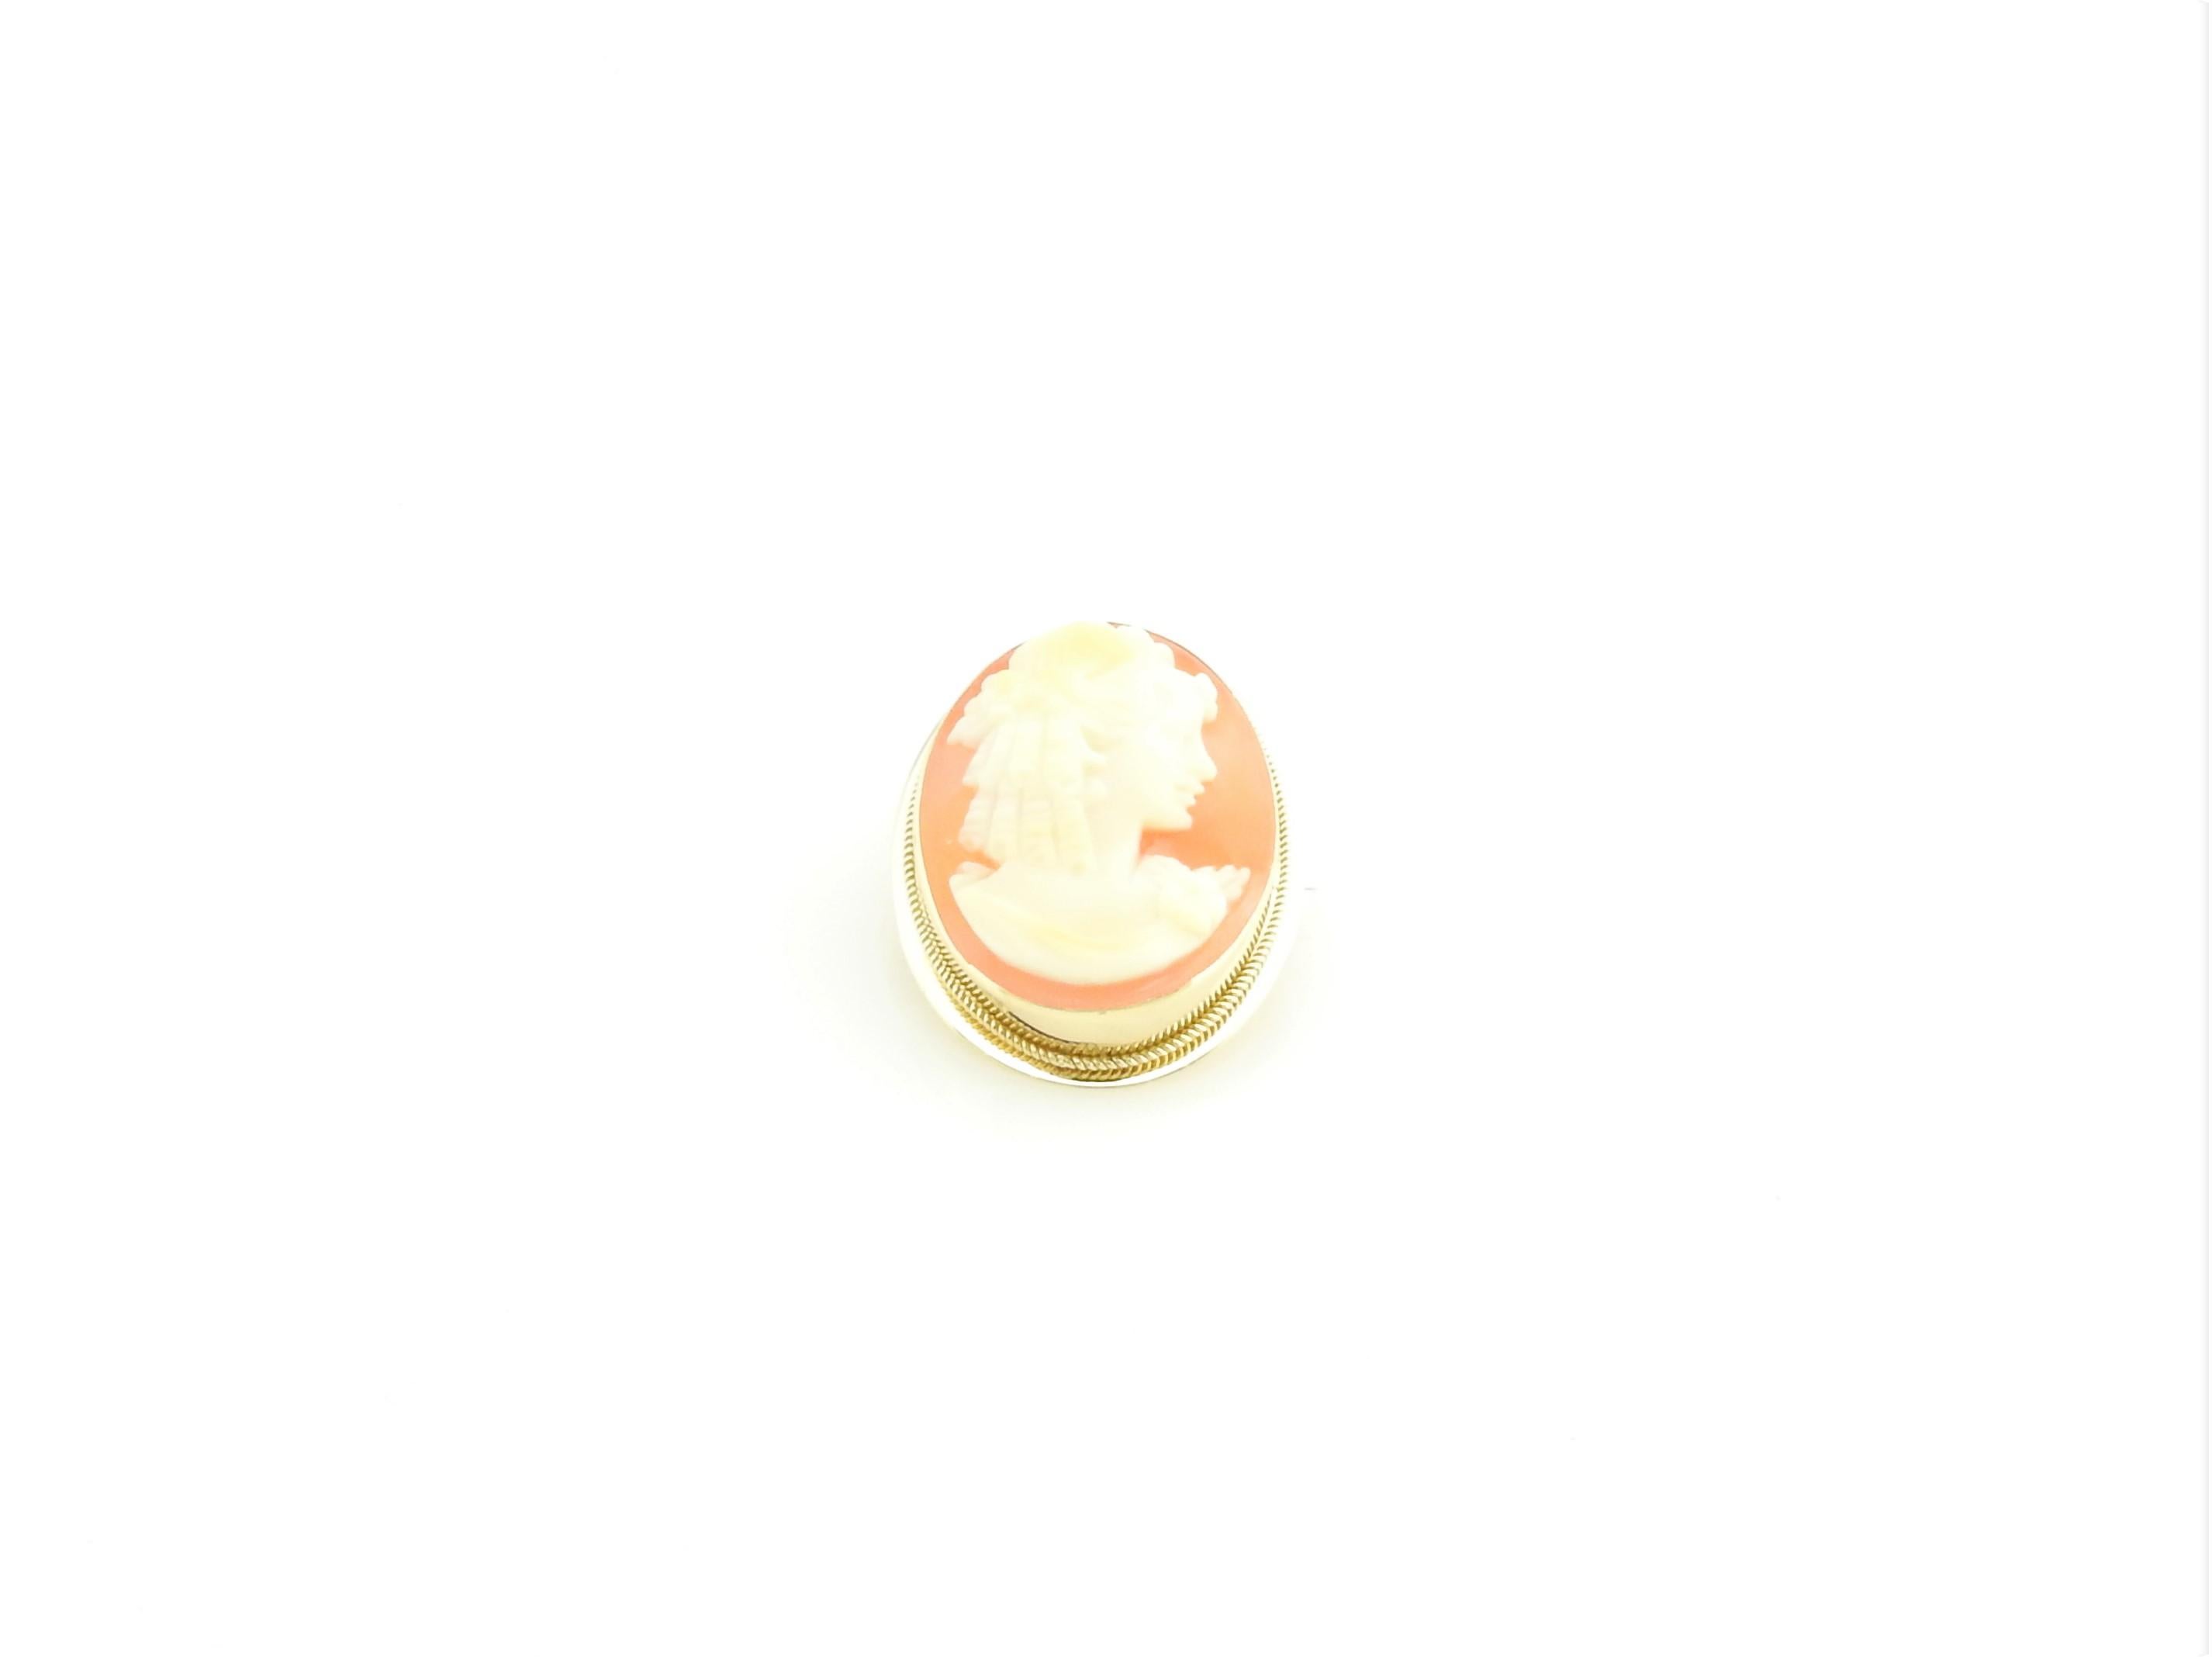 Vintage 18 Karat Yellow Gold Cameo Pendant/Brooch

This elegant cameo features a lovely lady in profile framed in beautifully detailed 14K yellow gold. Can be worn as a brooch or a pendant.

Size: 22 mm x 17 mm

Weight: 2.3 dwt. / 3.6 gr.

Stamped: